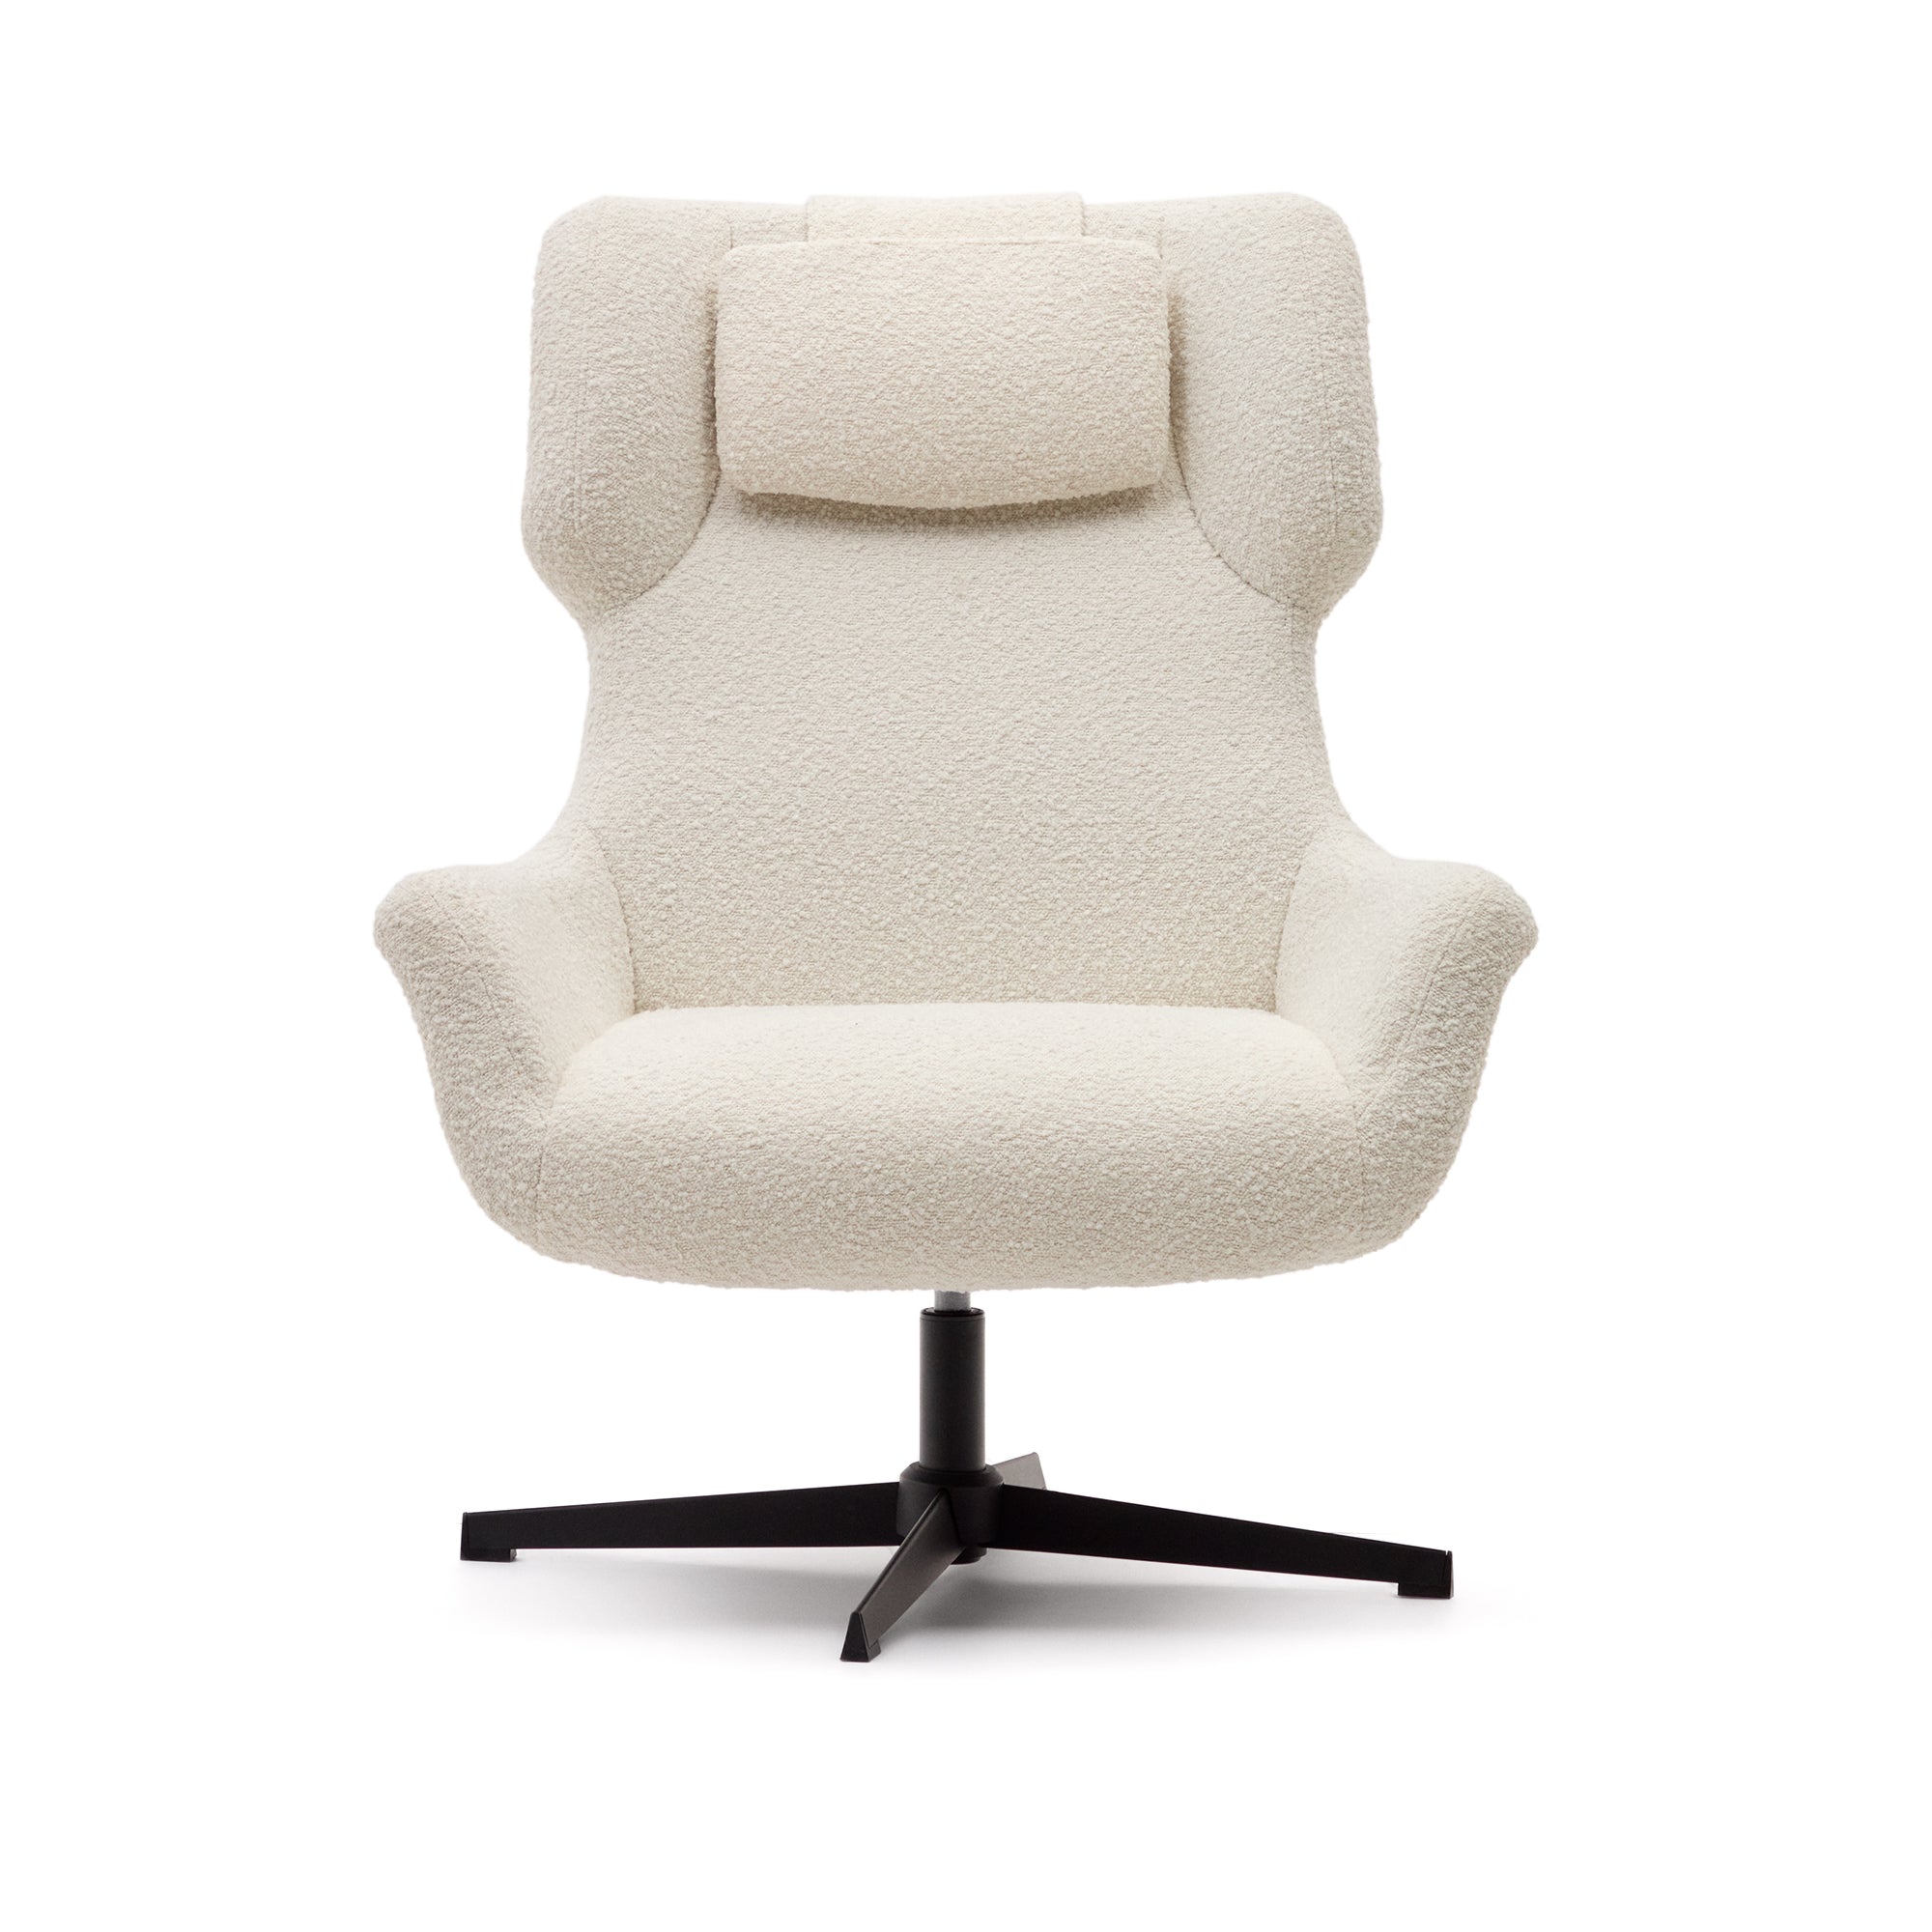 Zalina swivel armchair in white shearling and steel with black finish